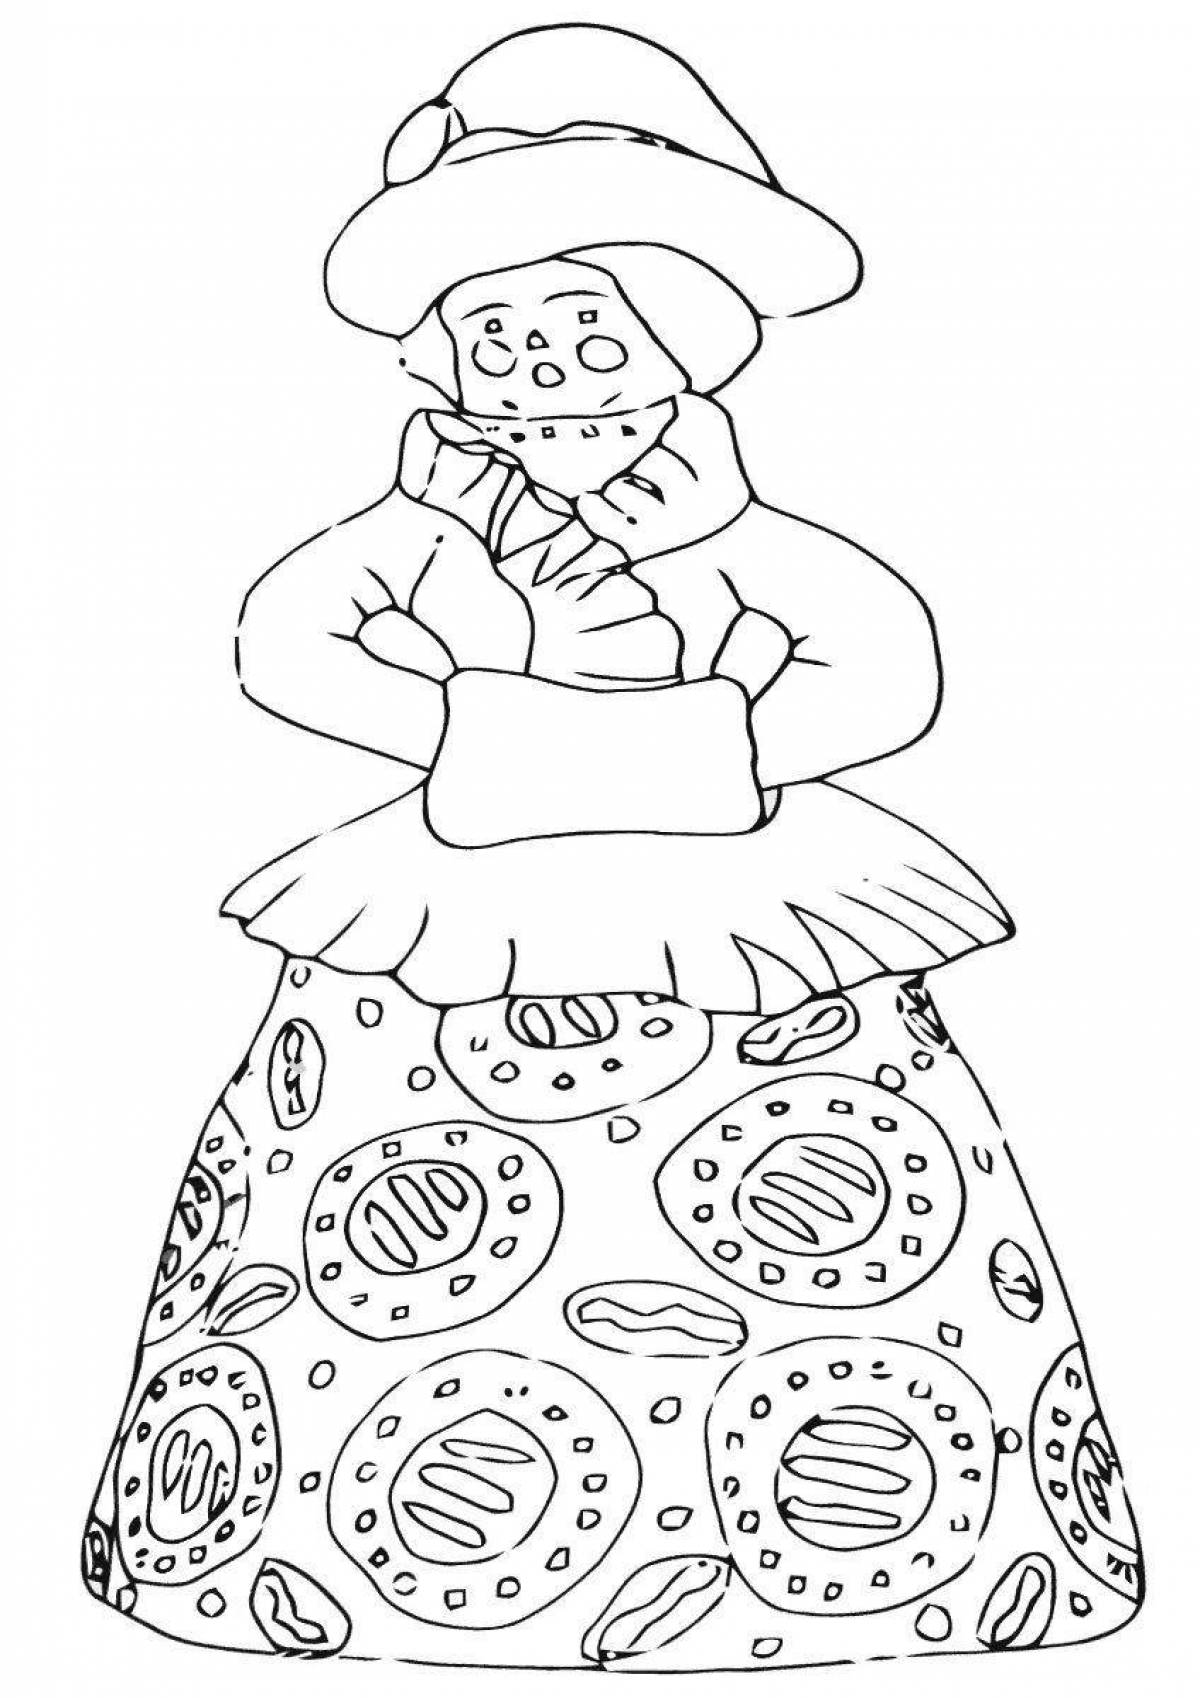 Coloring page exquisite Dymkovo toy hostess